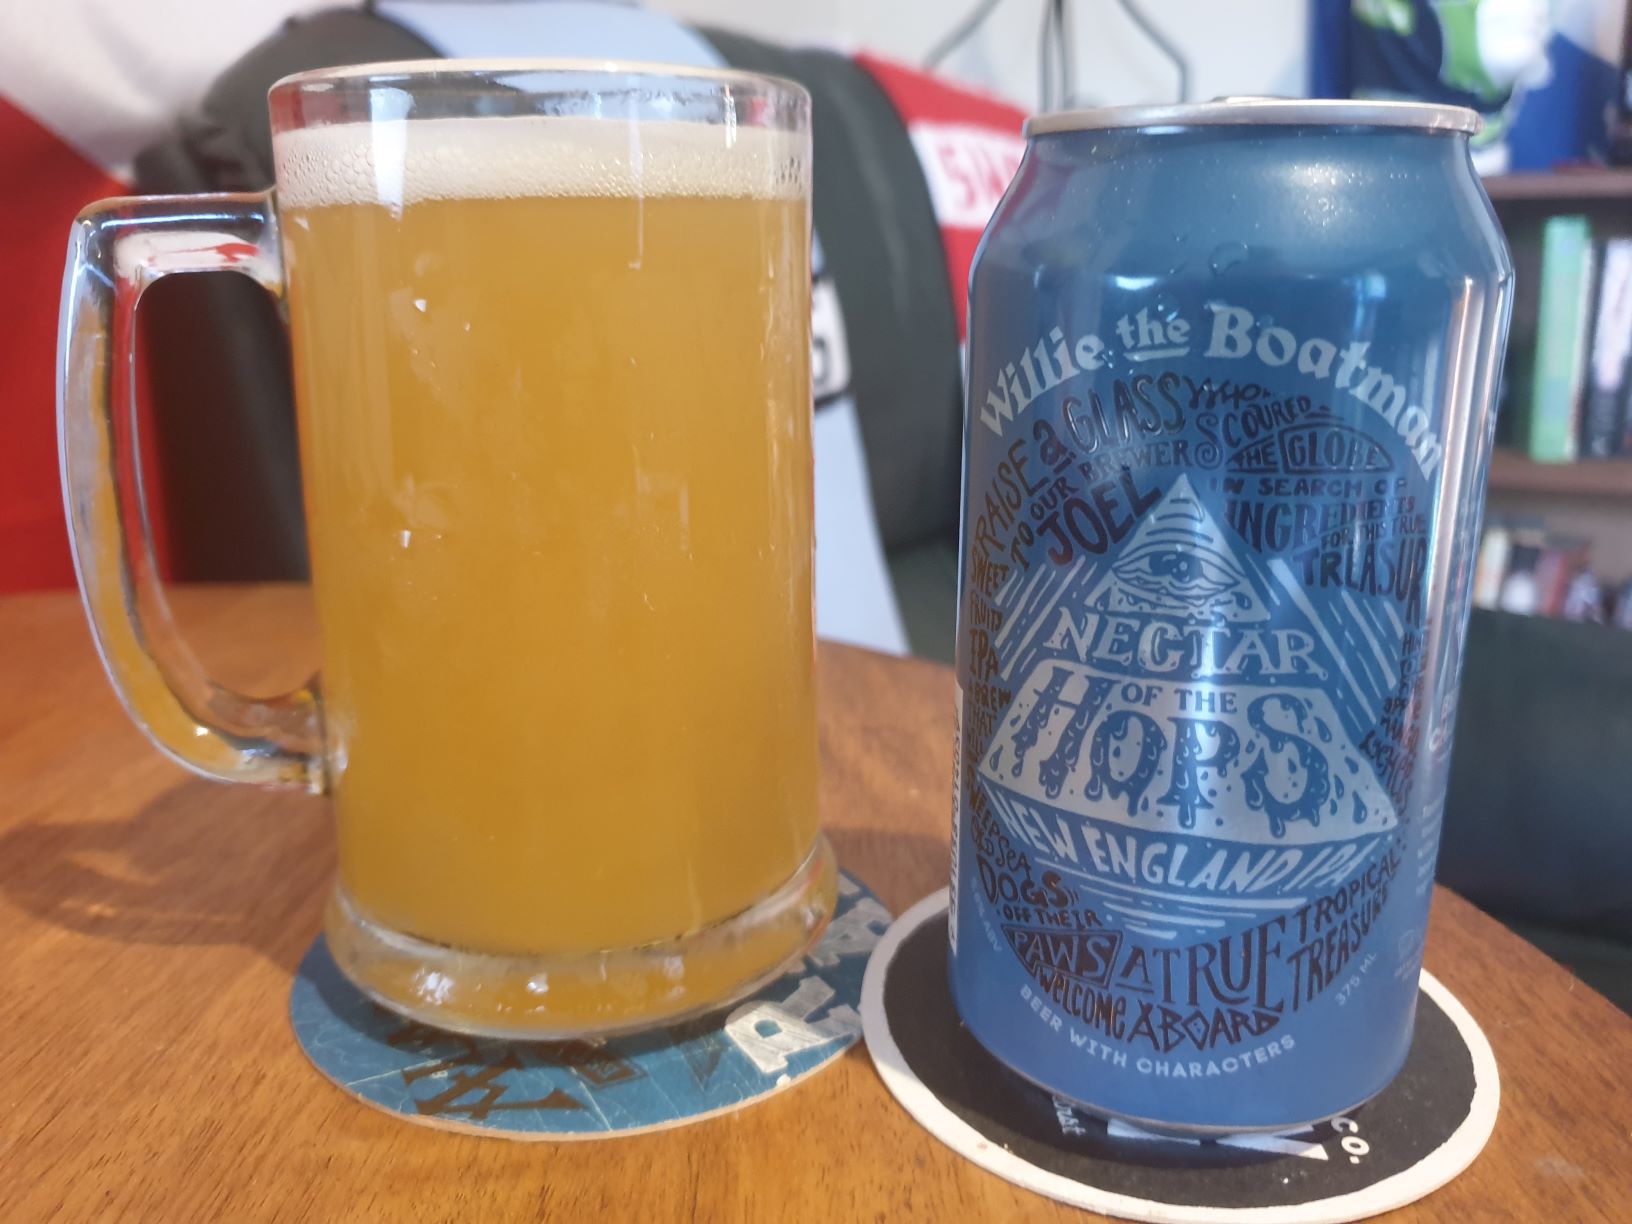 Nectar of the Hops NEIPA by Willie the Boatman